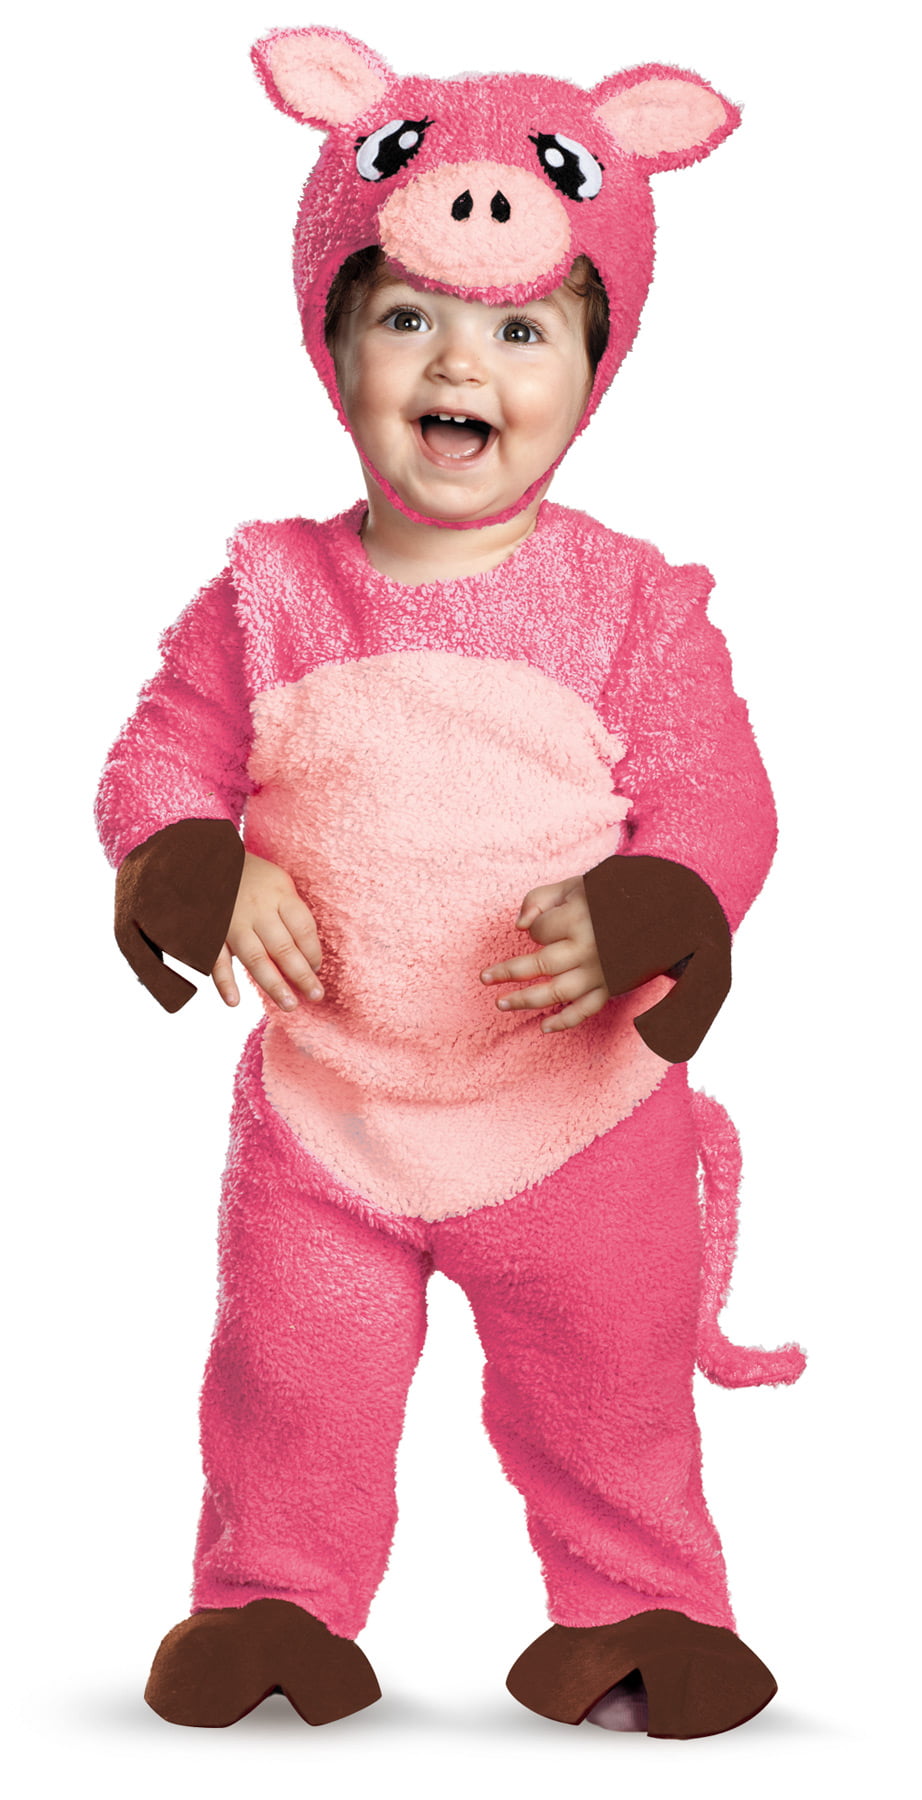 Peppa Pig Costumes For Toddlers Discount Shopping, Save 46% | jlcatj.gob.mx